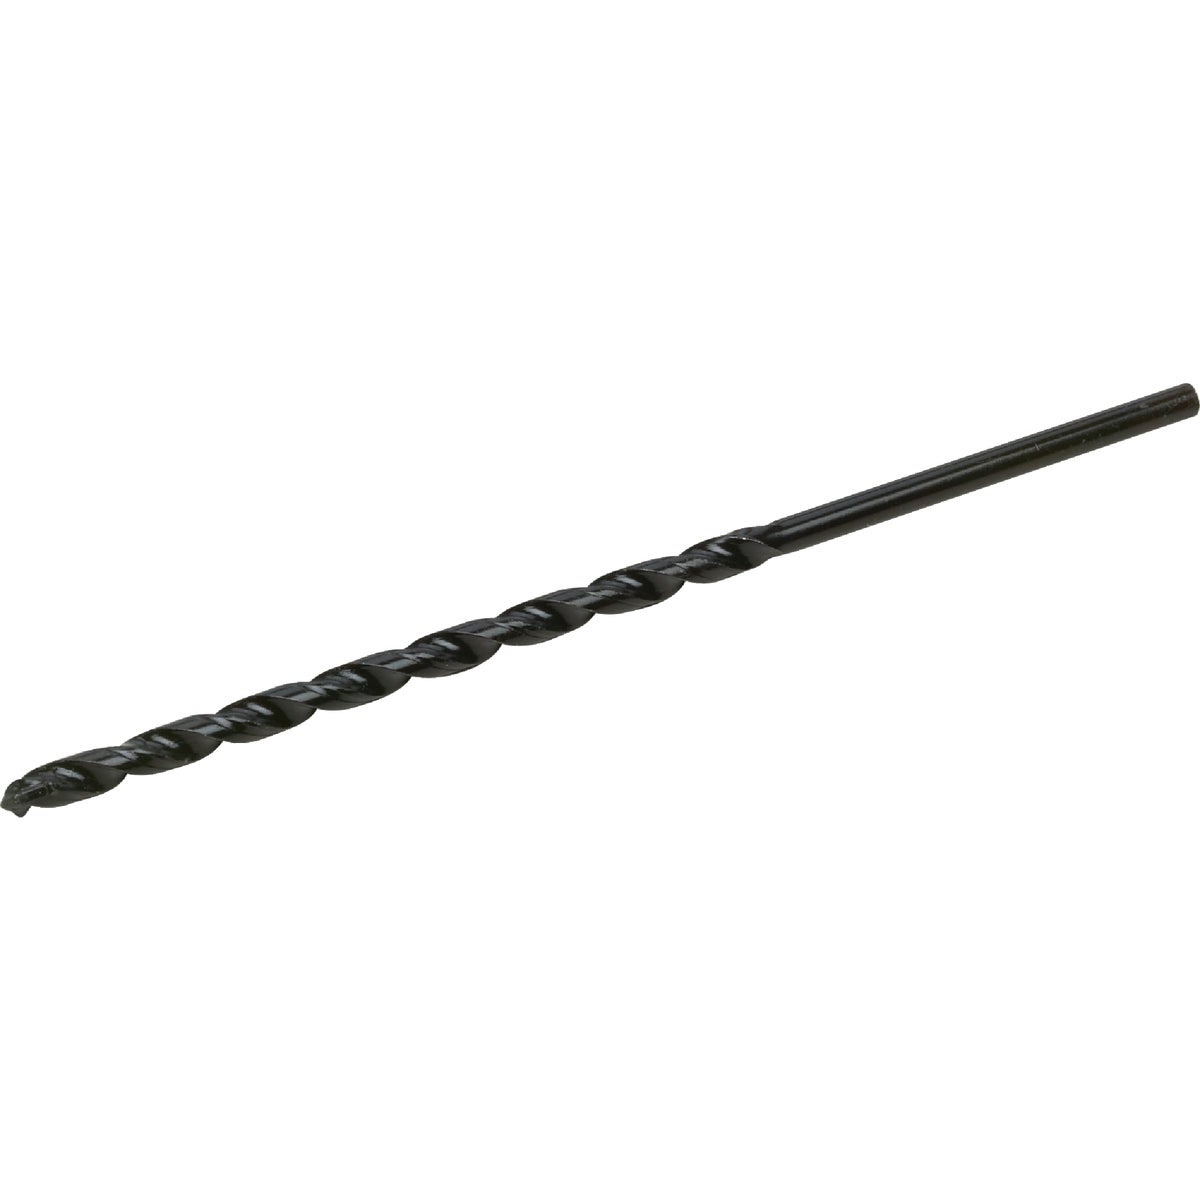 Item 719455, Carbide tipped tapcon drill bit delivers strength for drilling into tough 